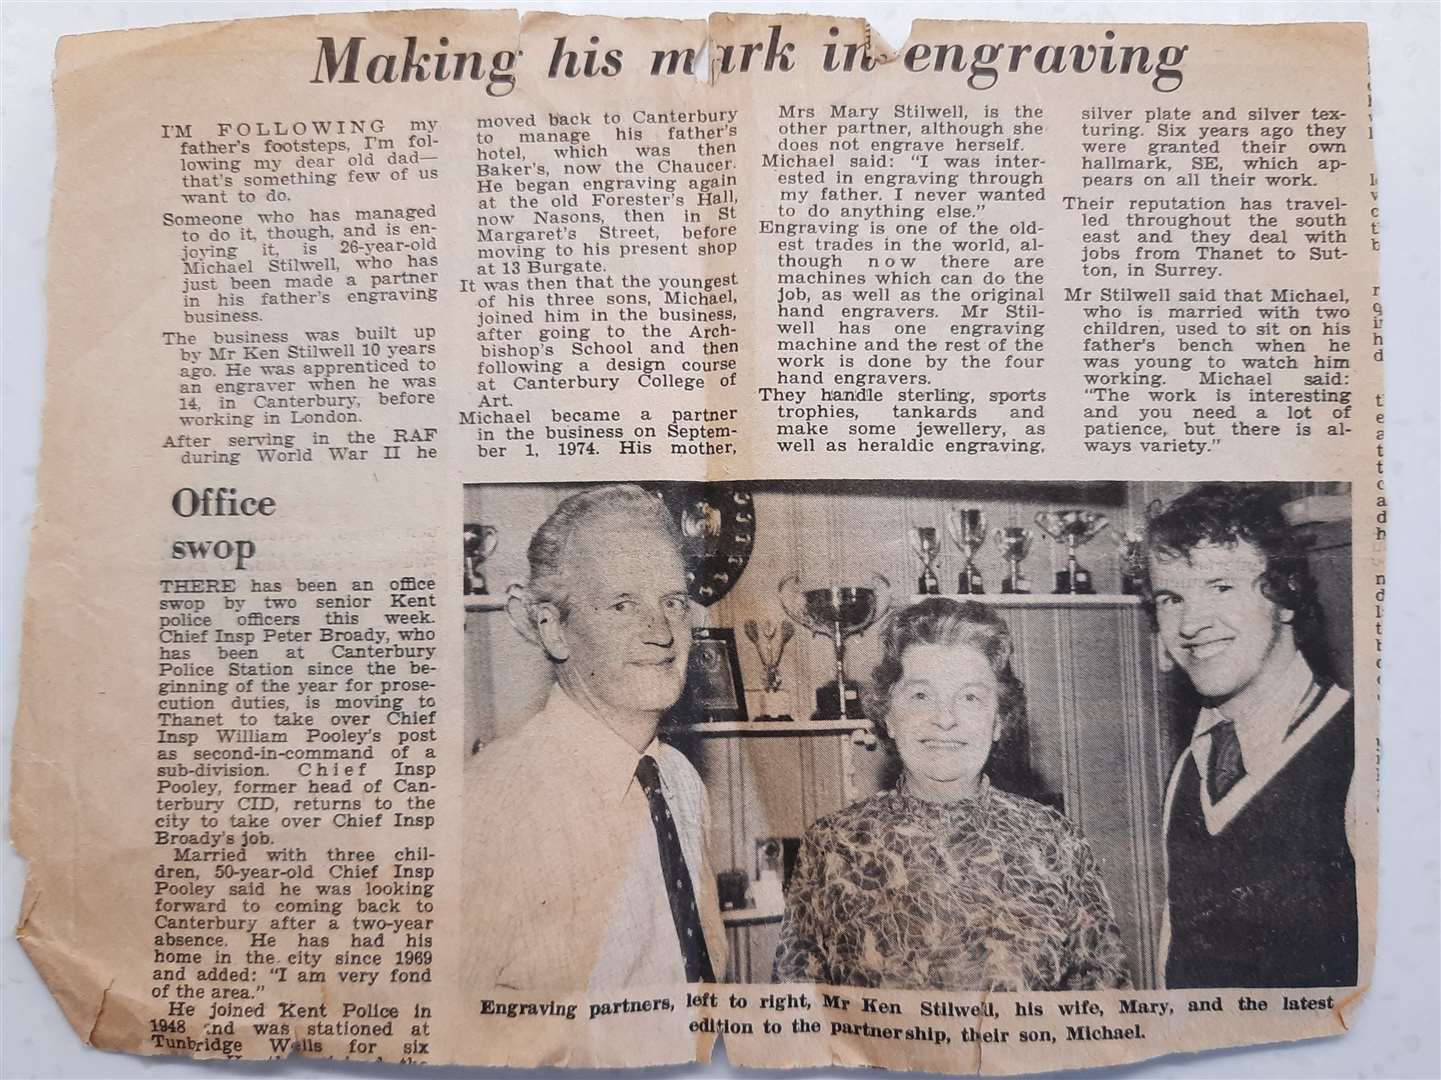 Ken and Mary Stilwell welcomed son Mike into the business in the early 90s